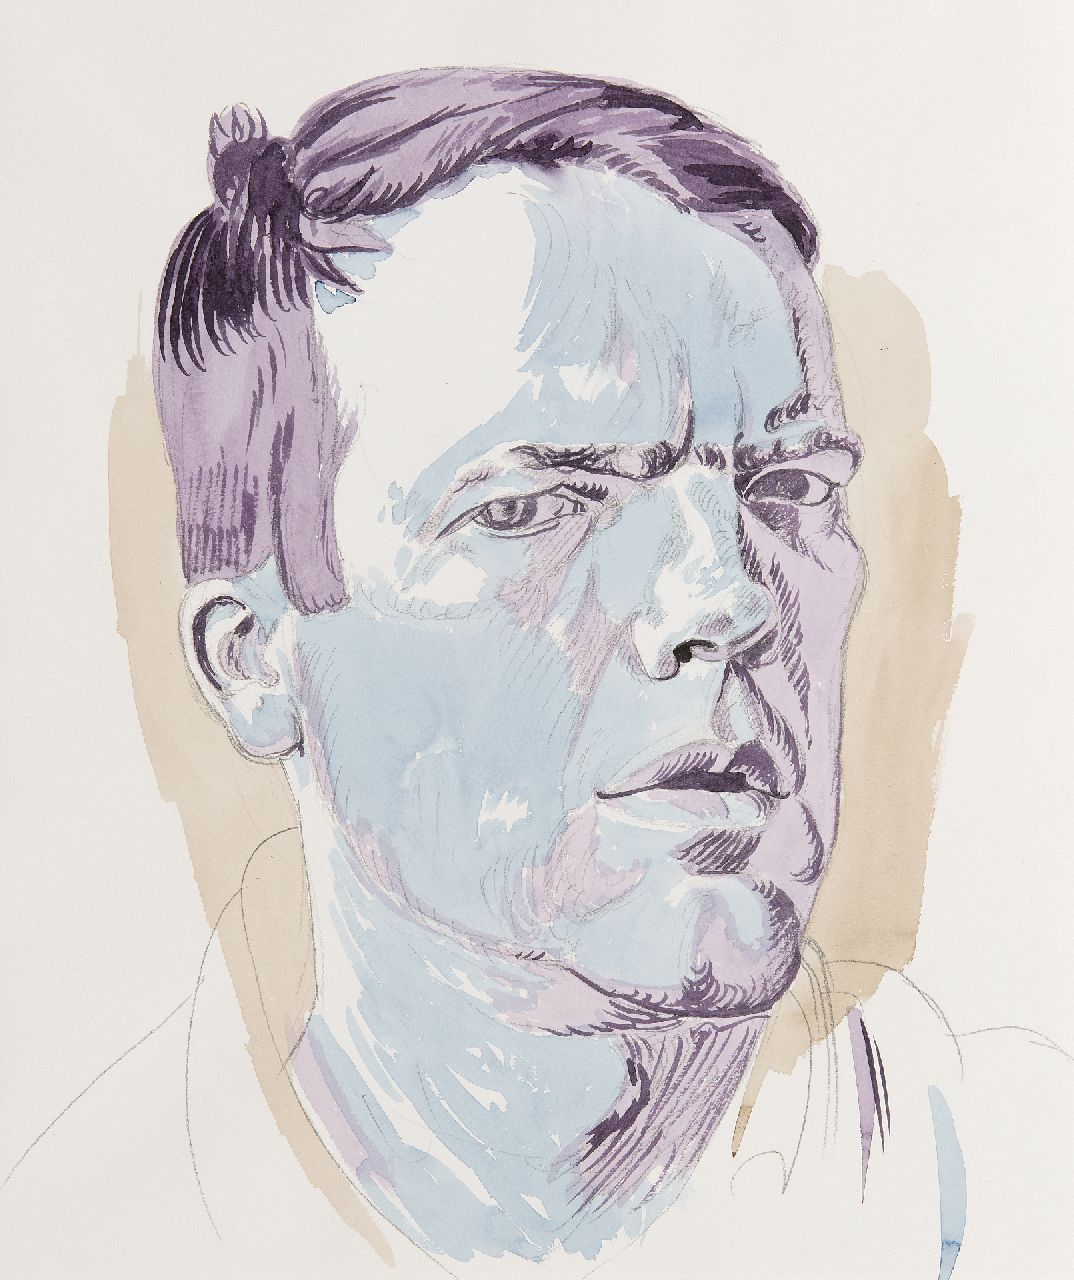 Akkerman P.  | Philip Maria Akkerman | Watercolours and drawings offered for sale | Self portrait, pencil and watercolour on paper 37.8 x 32.0 cm, signed on the reverse and dated on the reverse 2001